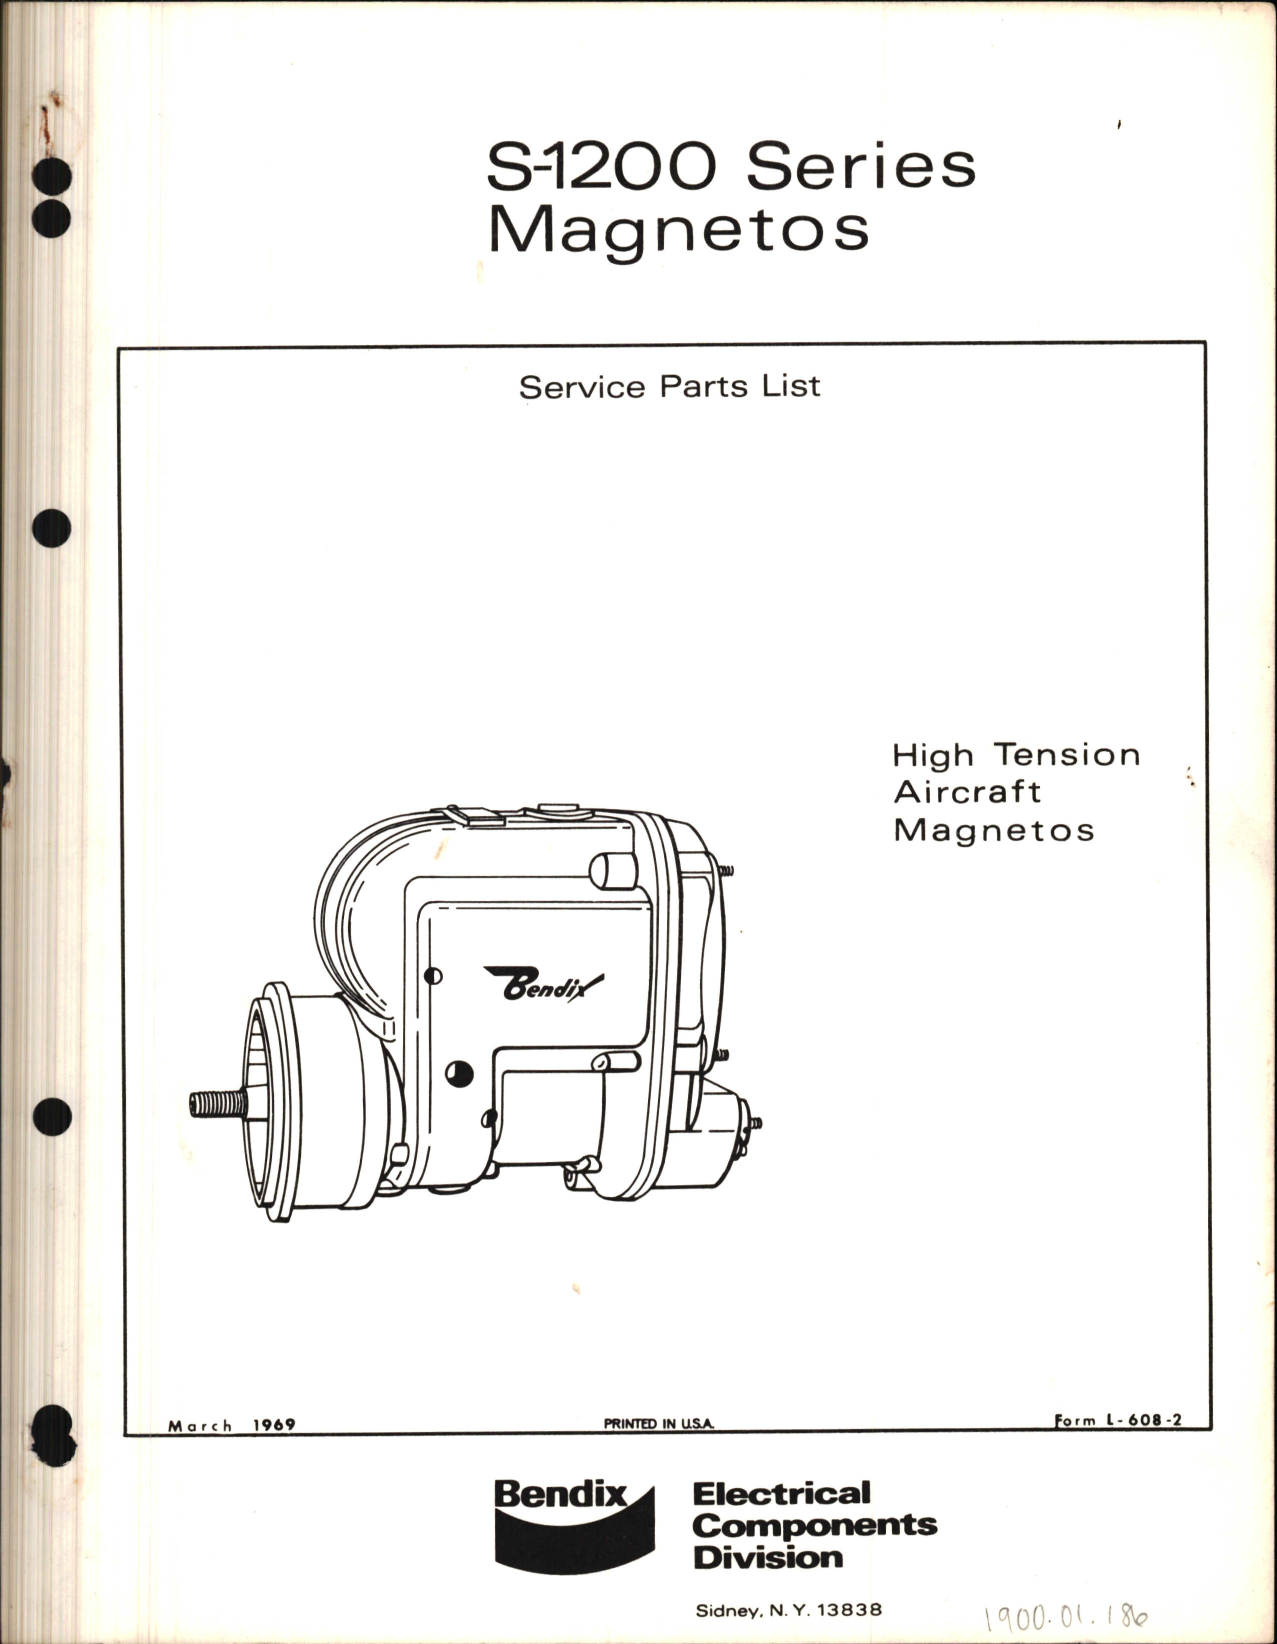 Sample page 1 from AirCorps Library document: Service Parts List for S-1200 Series Magnetos